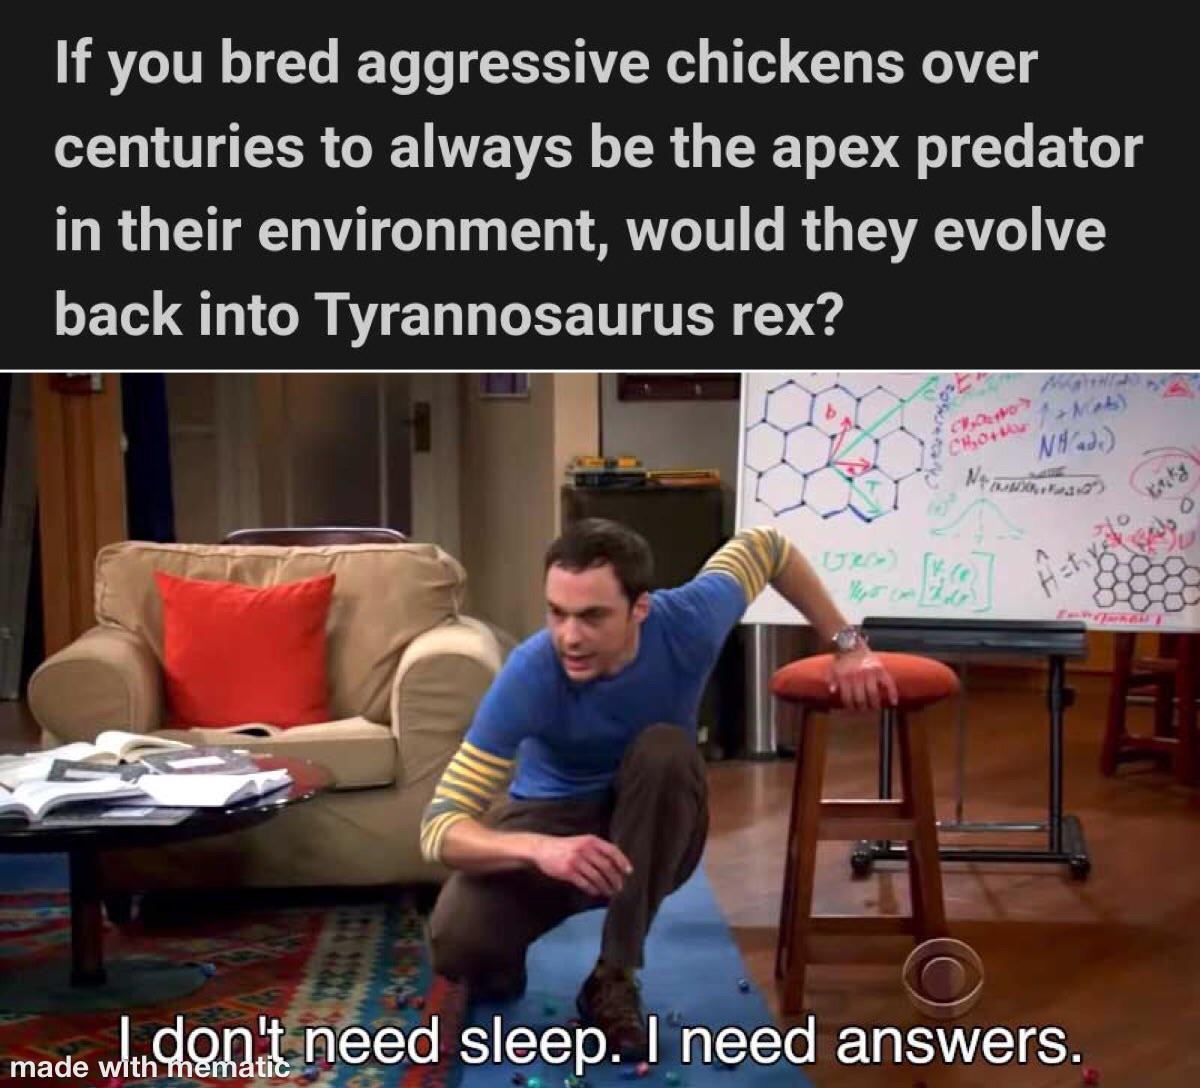 funny memes - dank memes - don t need sleep i need answers meme template - If you bred aggressive chickens over centuries to always be the apex predator in their environment, would they evolve back into Tyrannosaurus rex? W.. Chor Mats Nad Me rastin V x2 